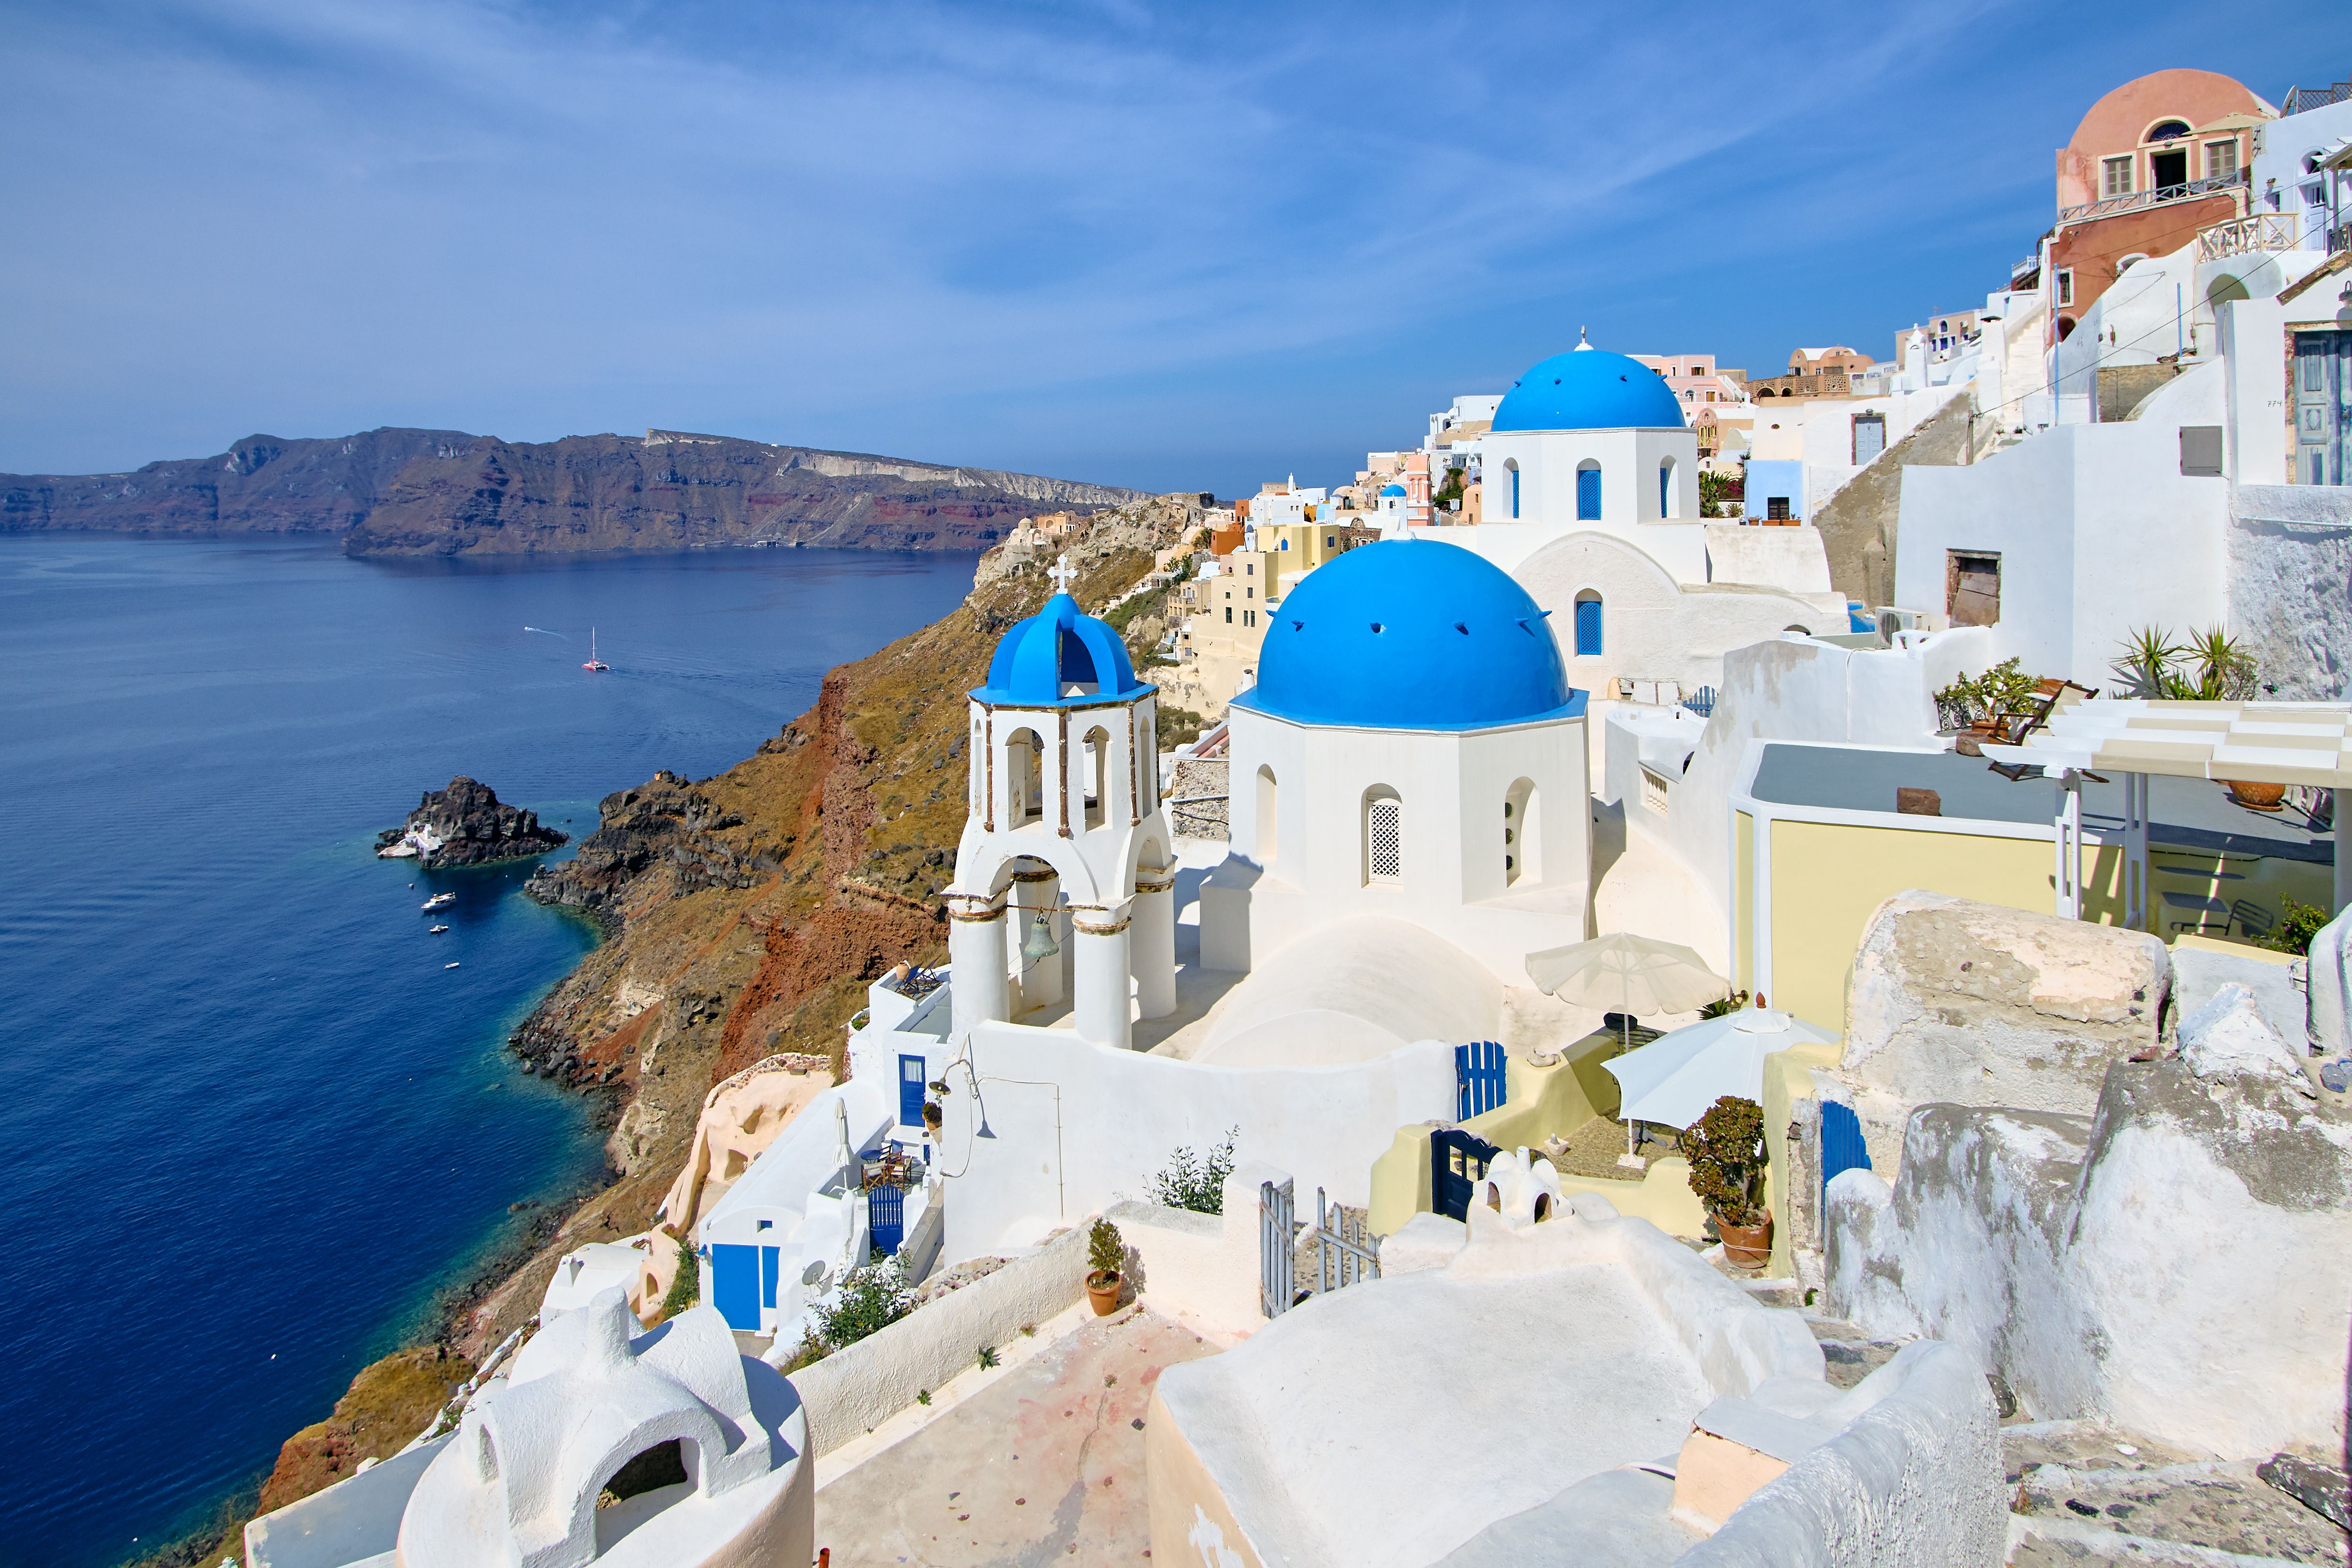 2. A Feast for the Senses: Immersing in the Volcanic Magnificence of Santorini's Landscape